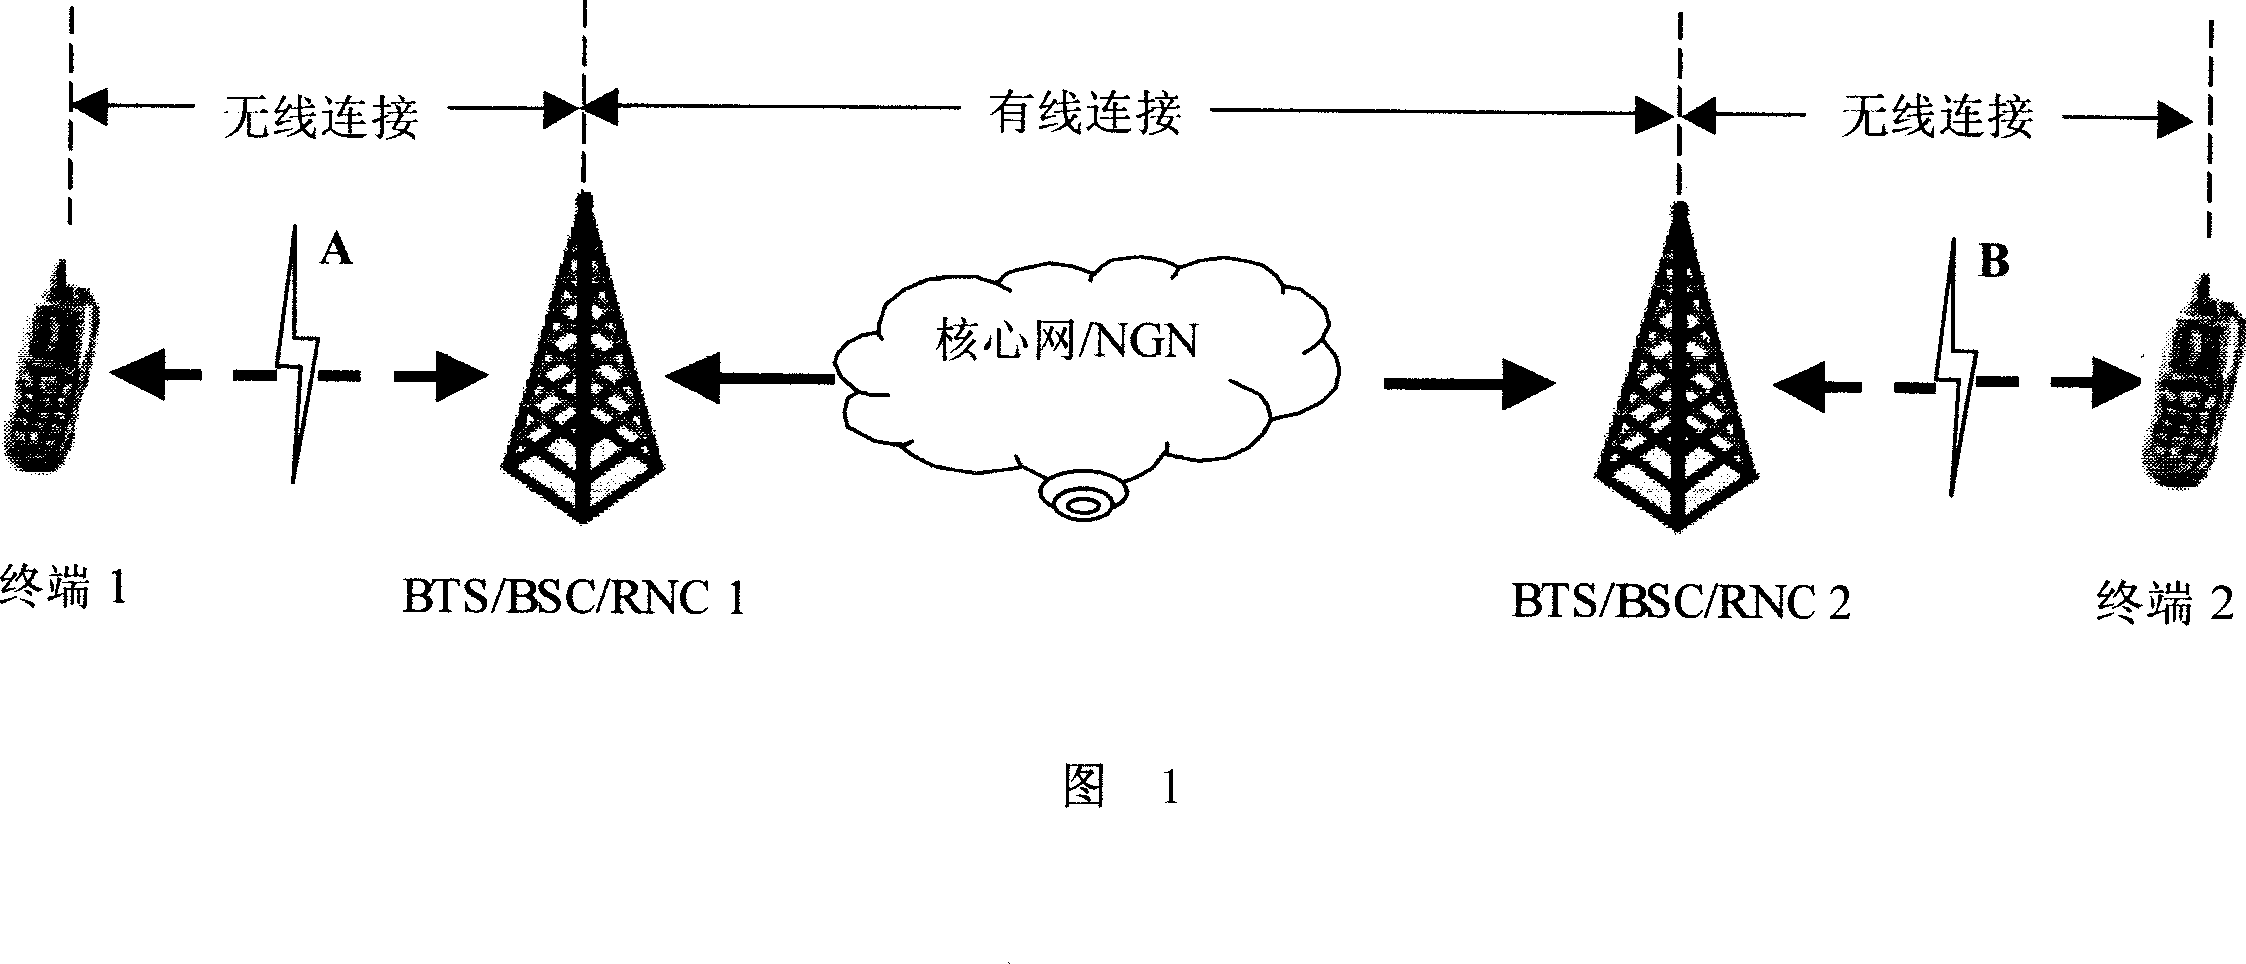 Video code stream error detecting and processing method in video communication